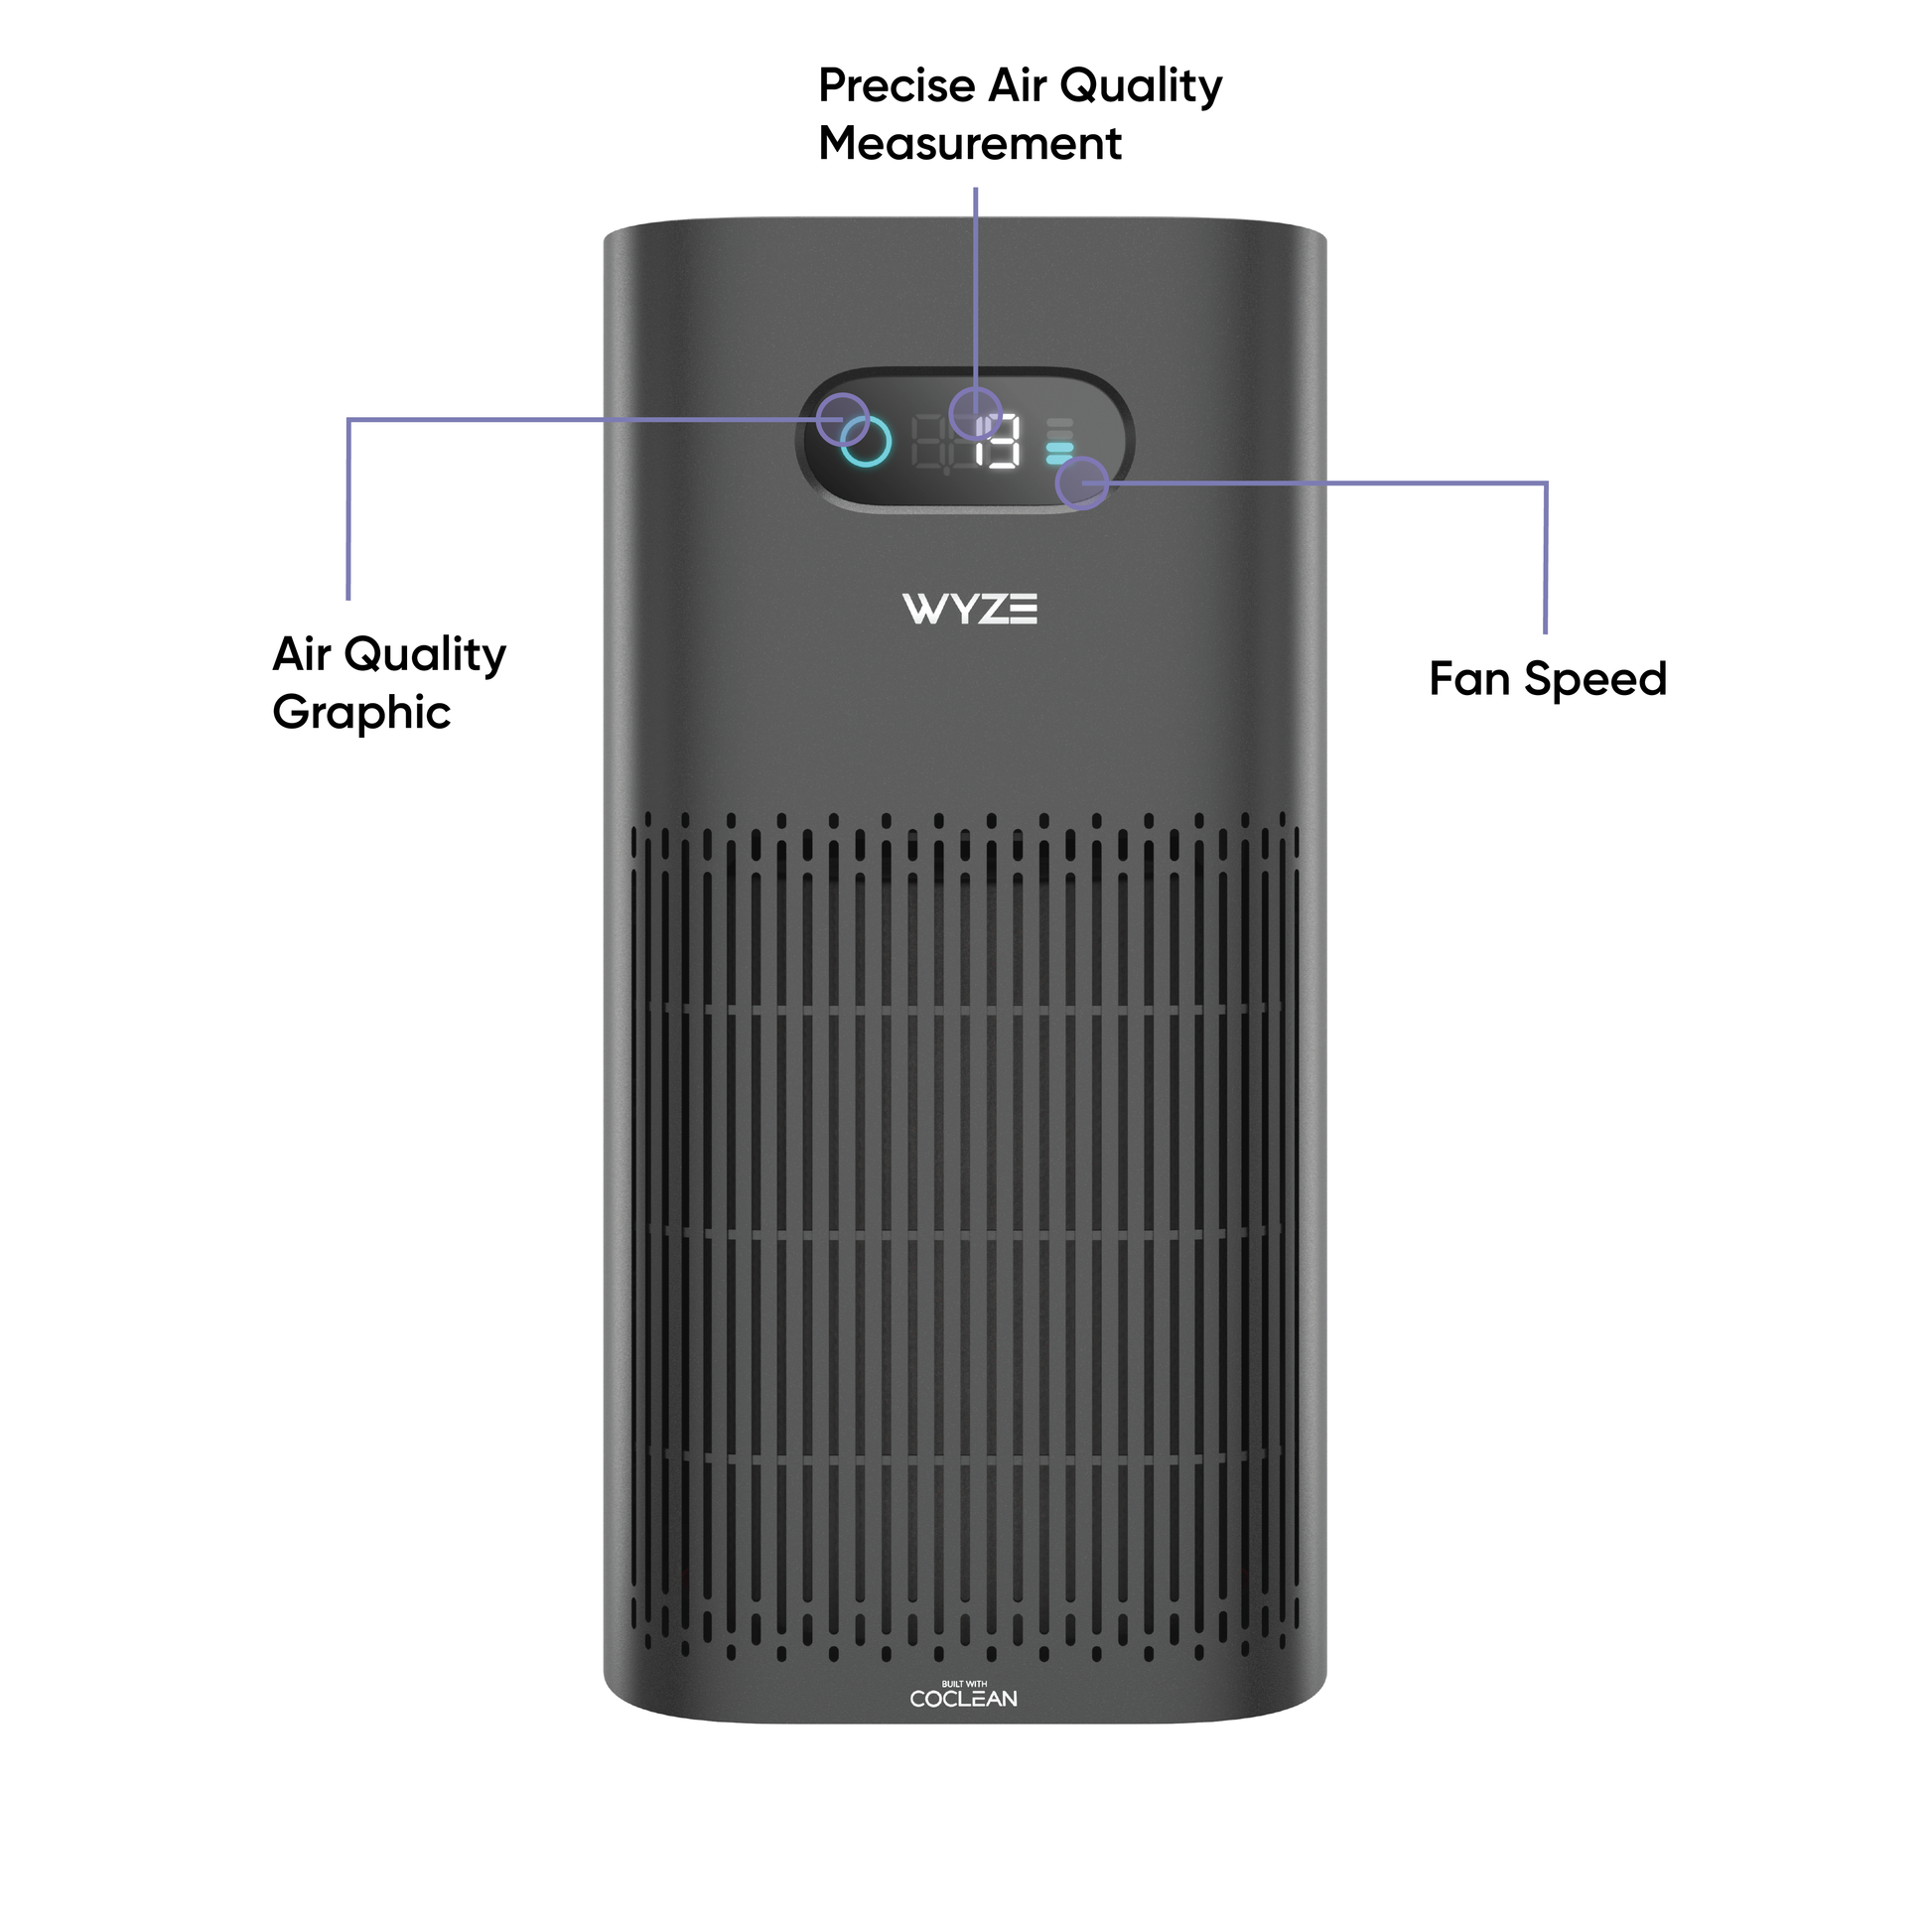 Wyze Air Purifier front-side view with text that says "Air Quality Graphic," "Precise Air Quality Measurement," and "Fan Speed."